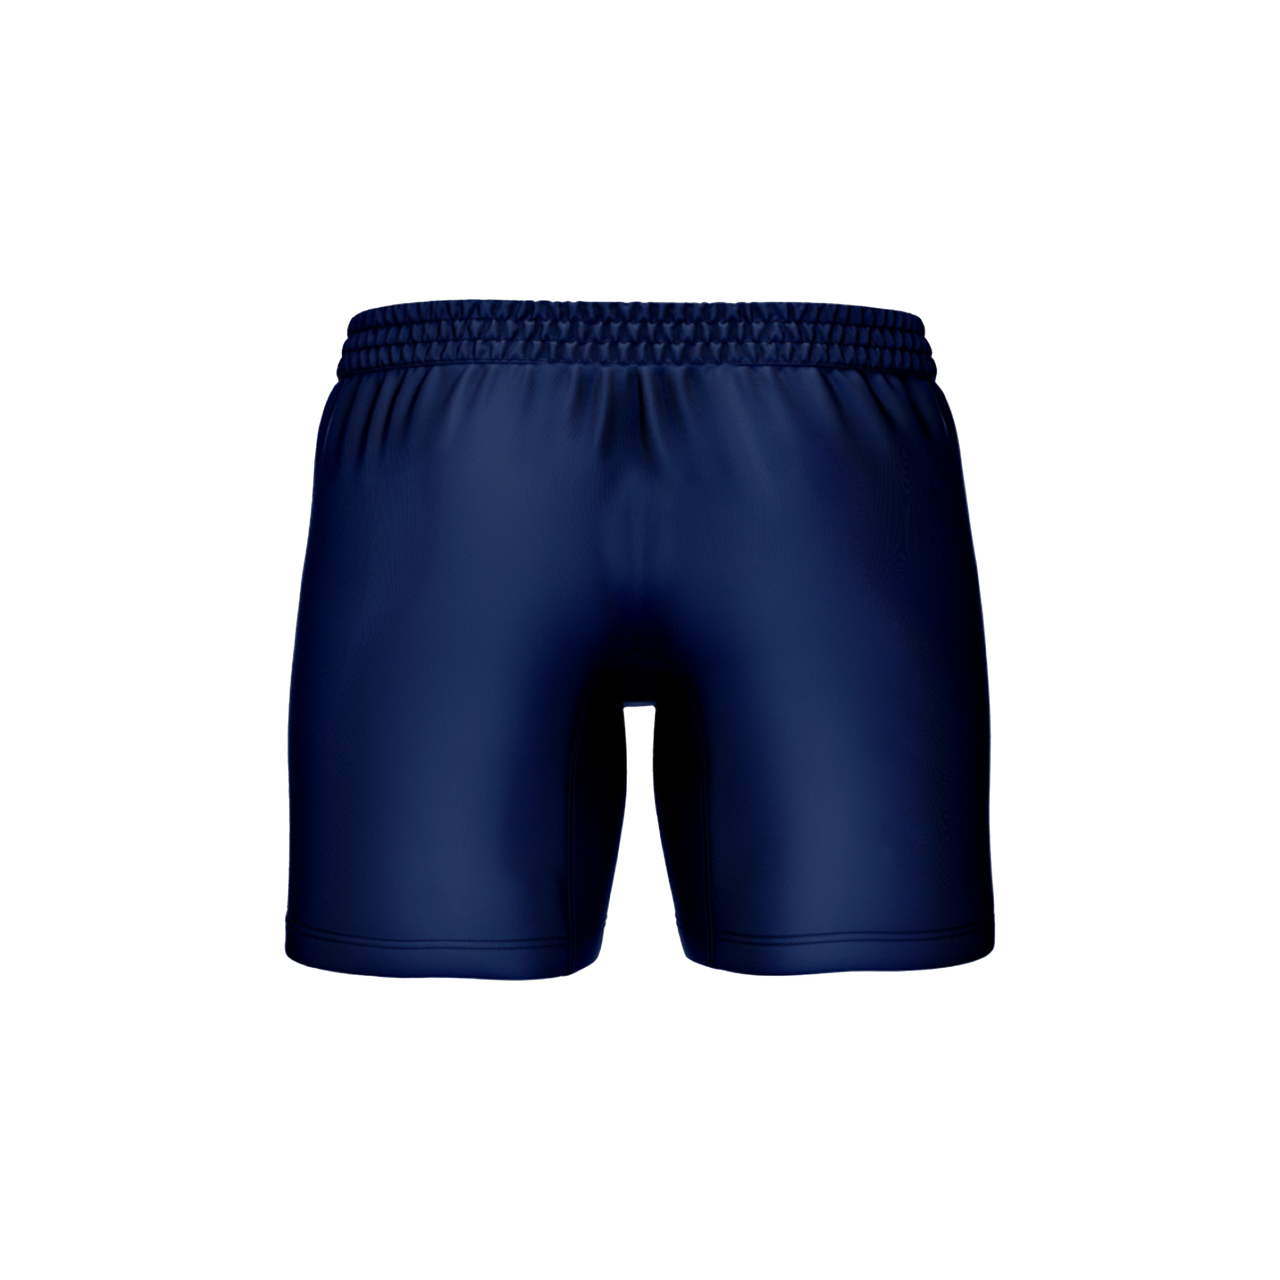 Monmouth Rugby Gym Shorts